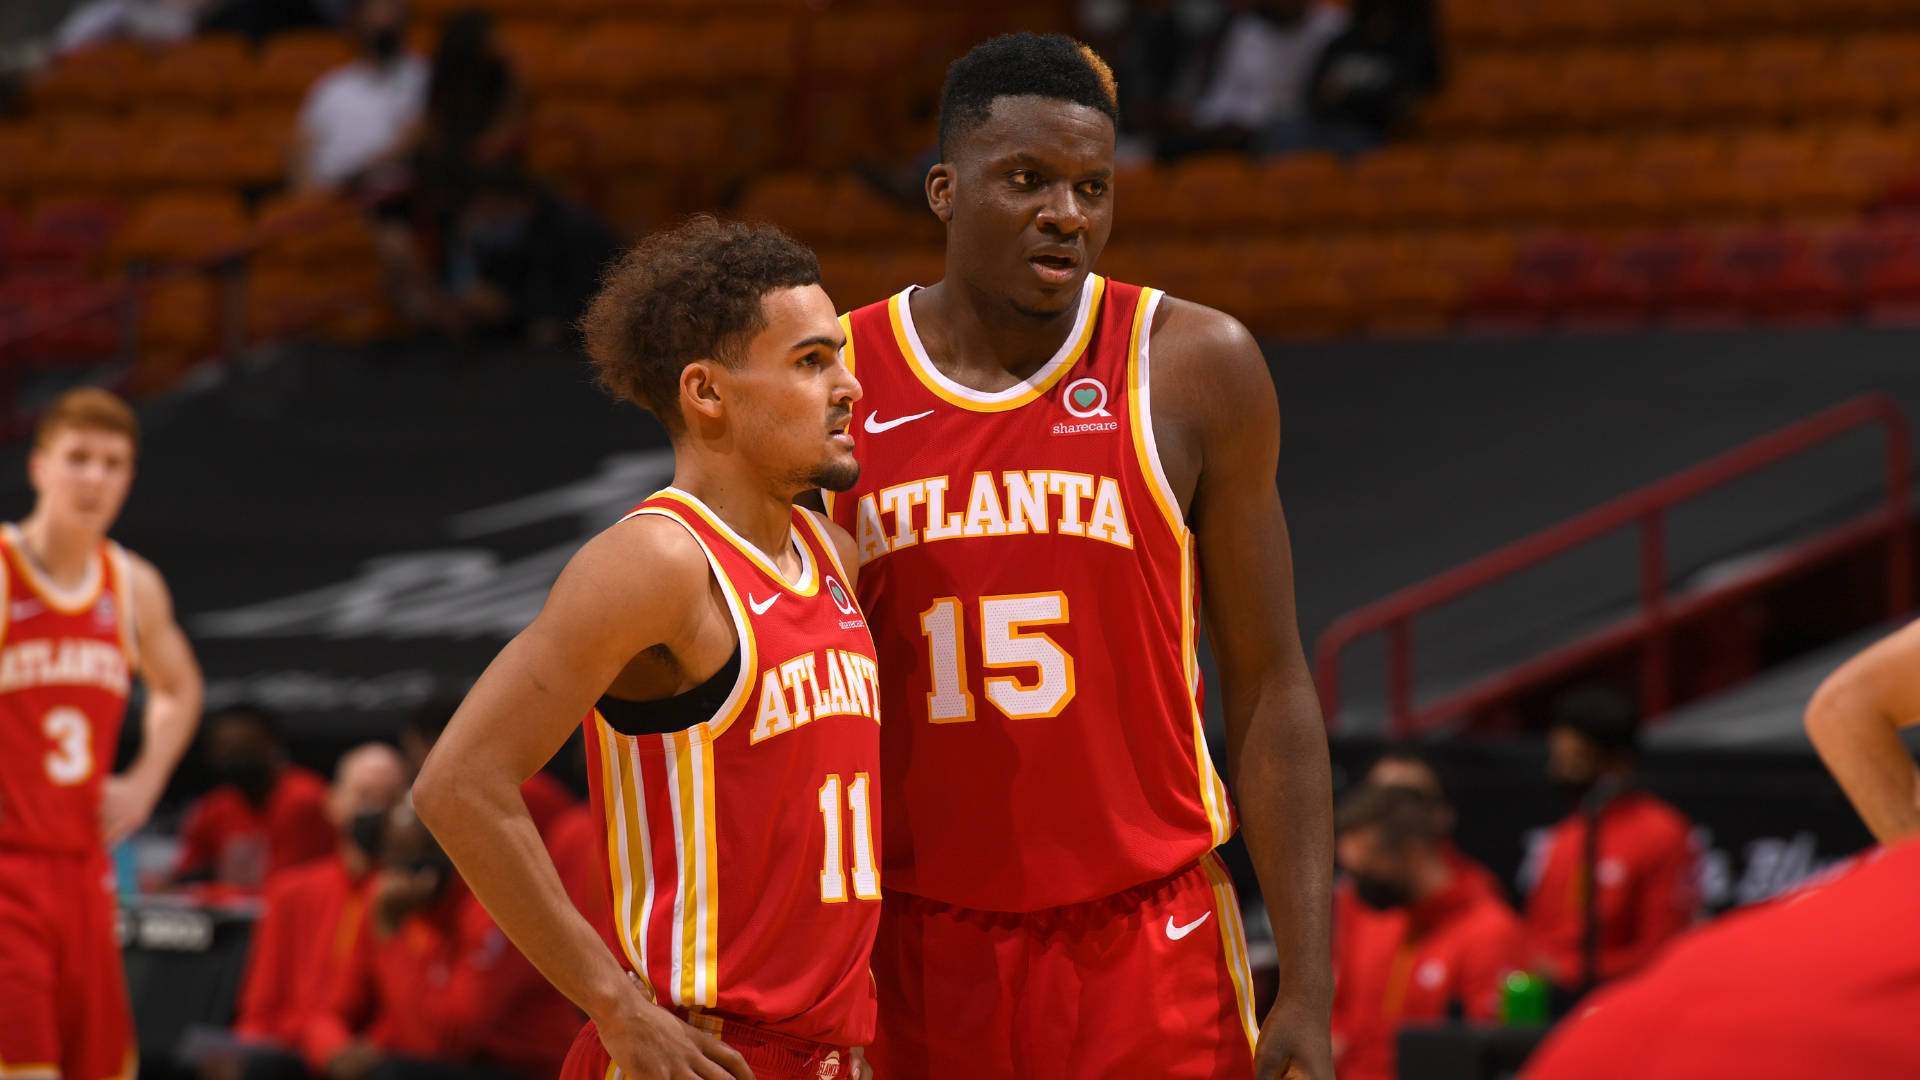 Atatlanta Hawks, Clint Capela Is Not A Computer Or Mobile Wallpaper-related Phrase. Clint Capela Is A Professional Basketball Player Who Currently Plays For The Atlanta Hawks Team. Could You Please Provide Specific Phrases Or Sentences Related To Computer Or Mobile Wallpaper That You Would Like Me To Translate Into Spanish? Fondo de pantalla